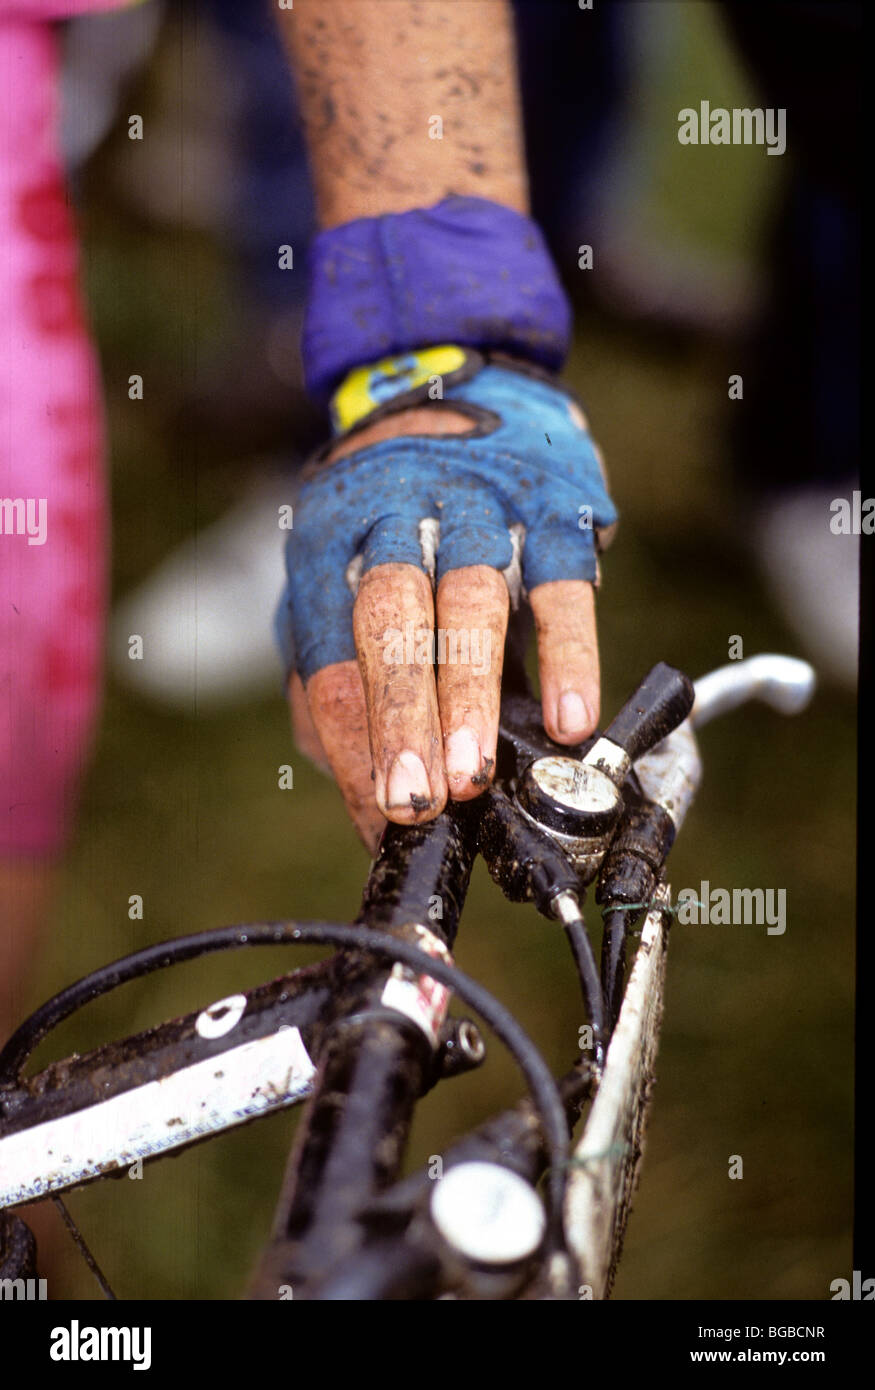 Close up of a cyclists muddy hand on handle bars Stock Photo